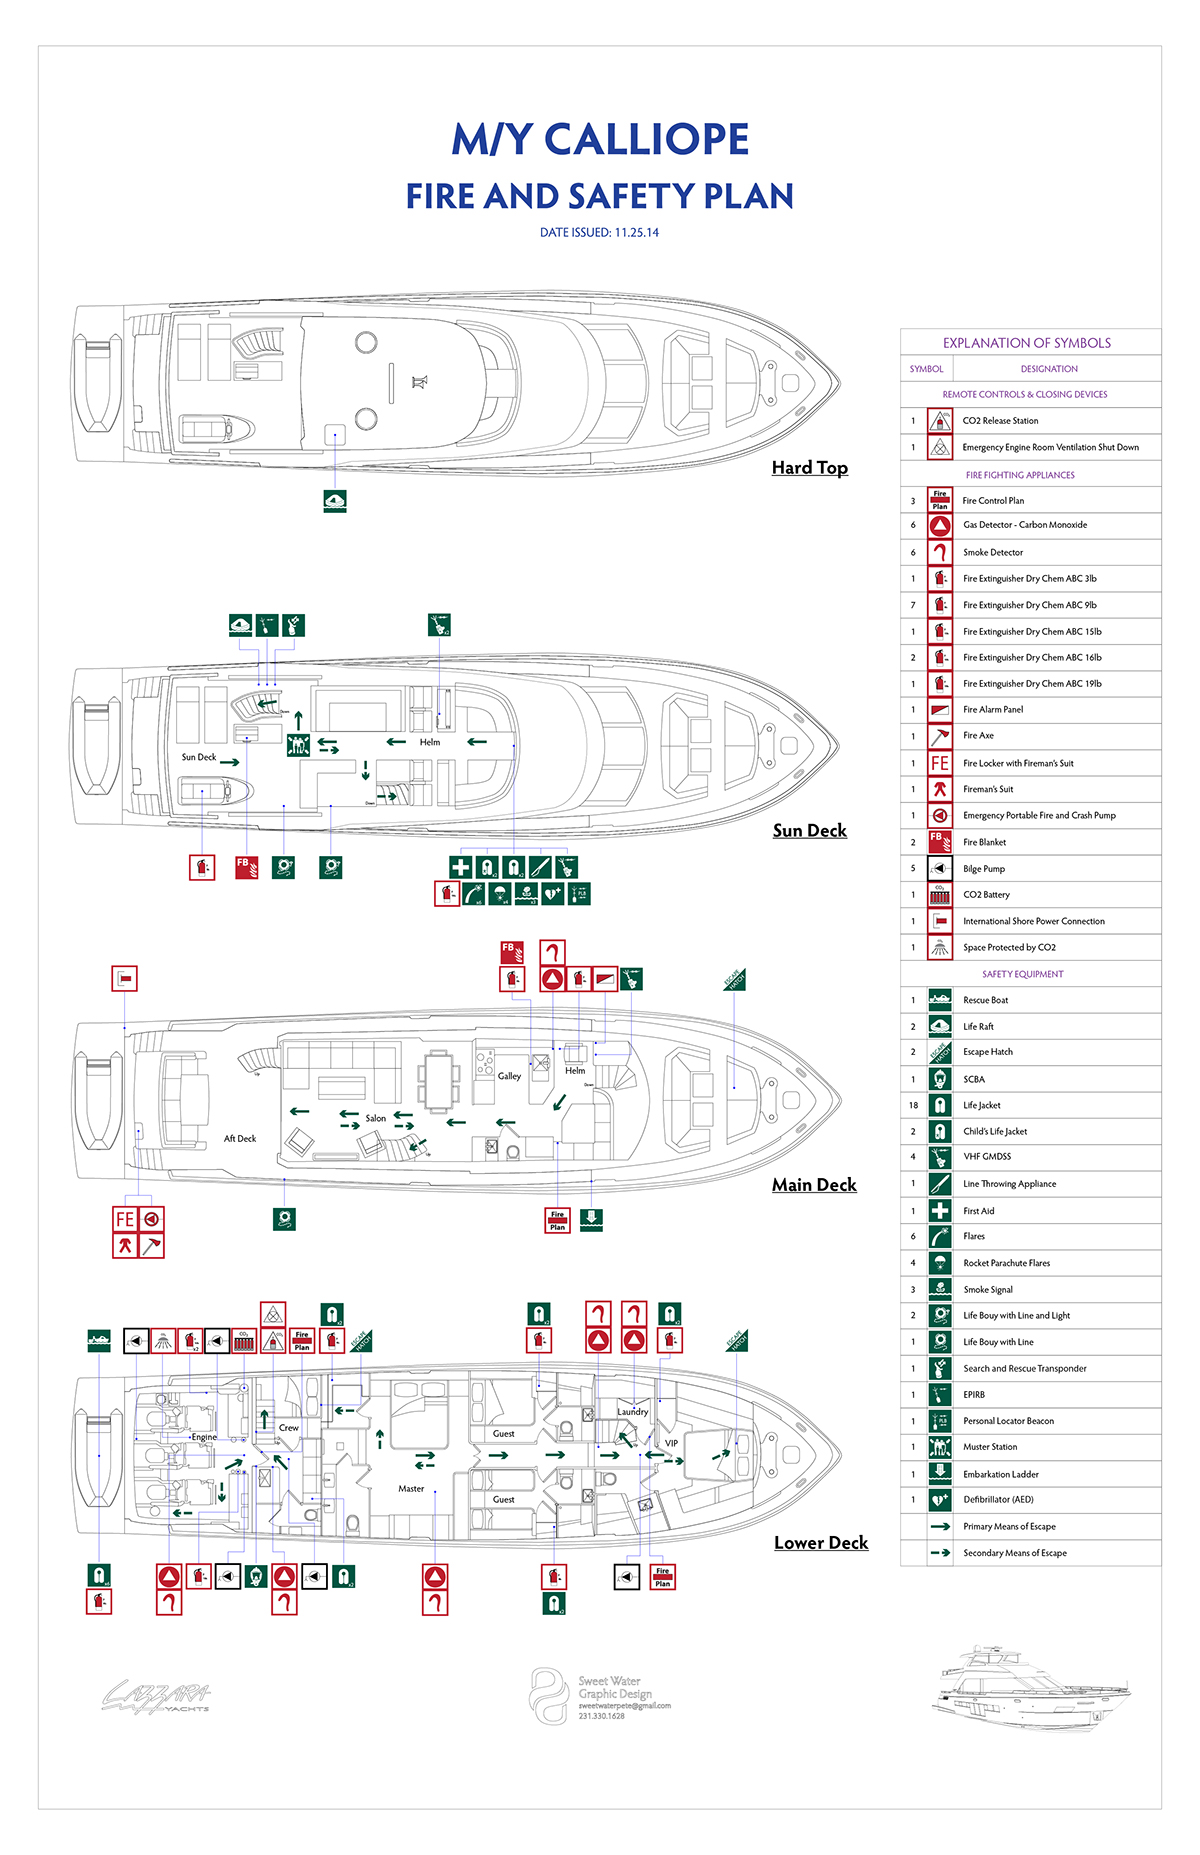 Fire Plan Safety Plan super yacht Mega Yacht safety map SOLAS imo floor plan Lazzara boat Power Boat yacht nautical